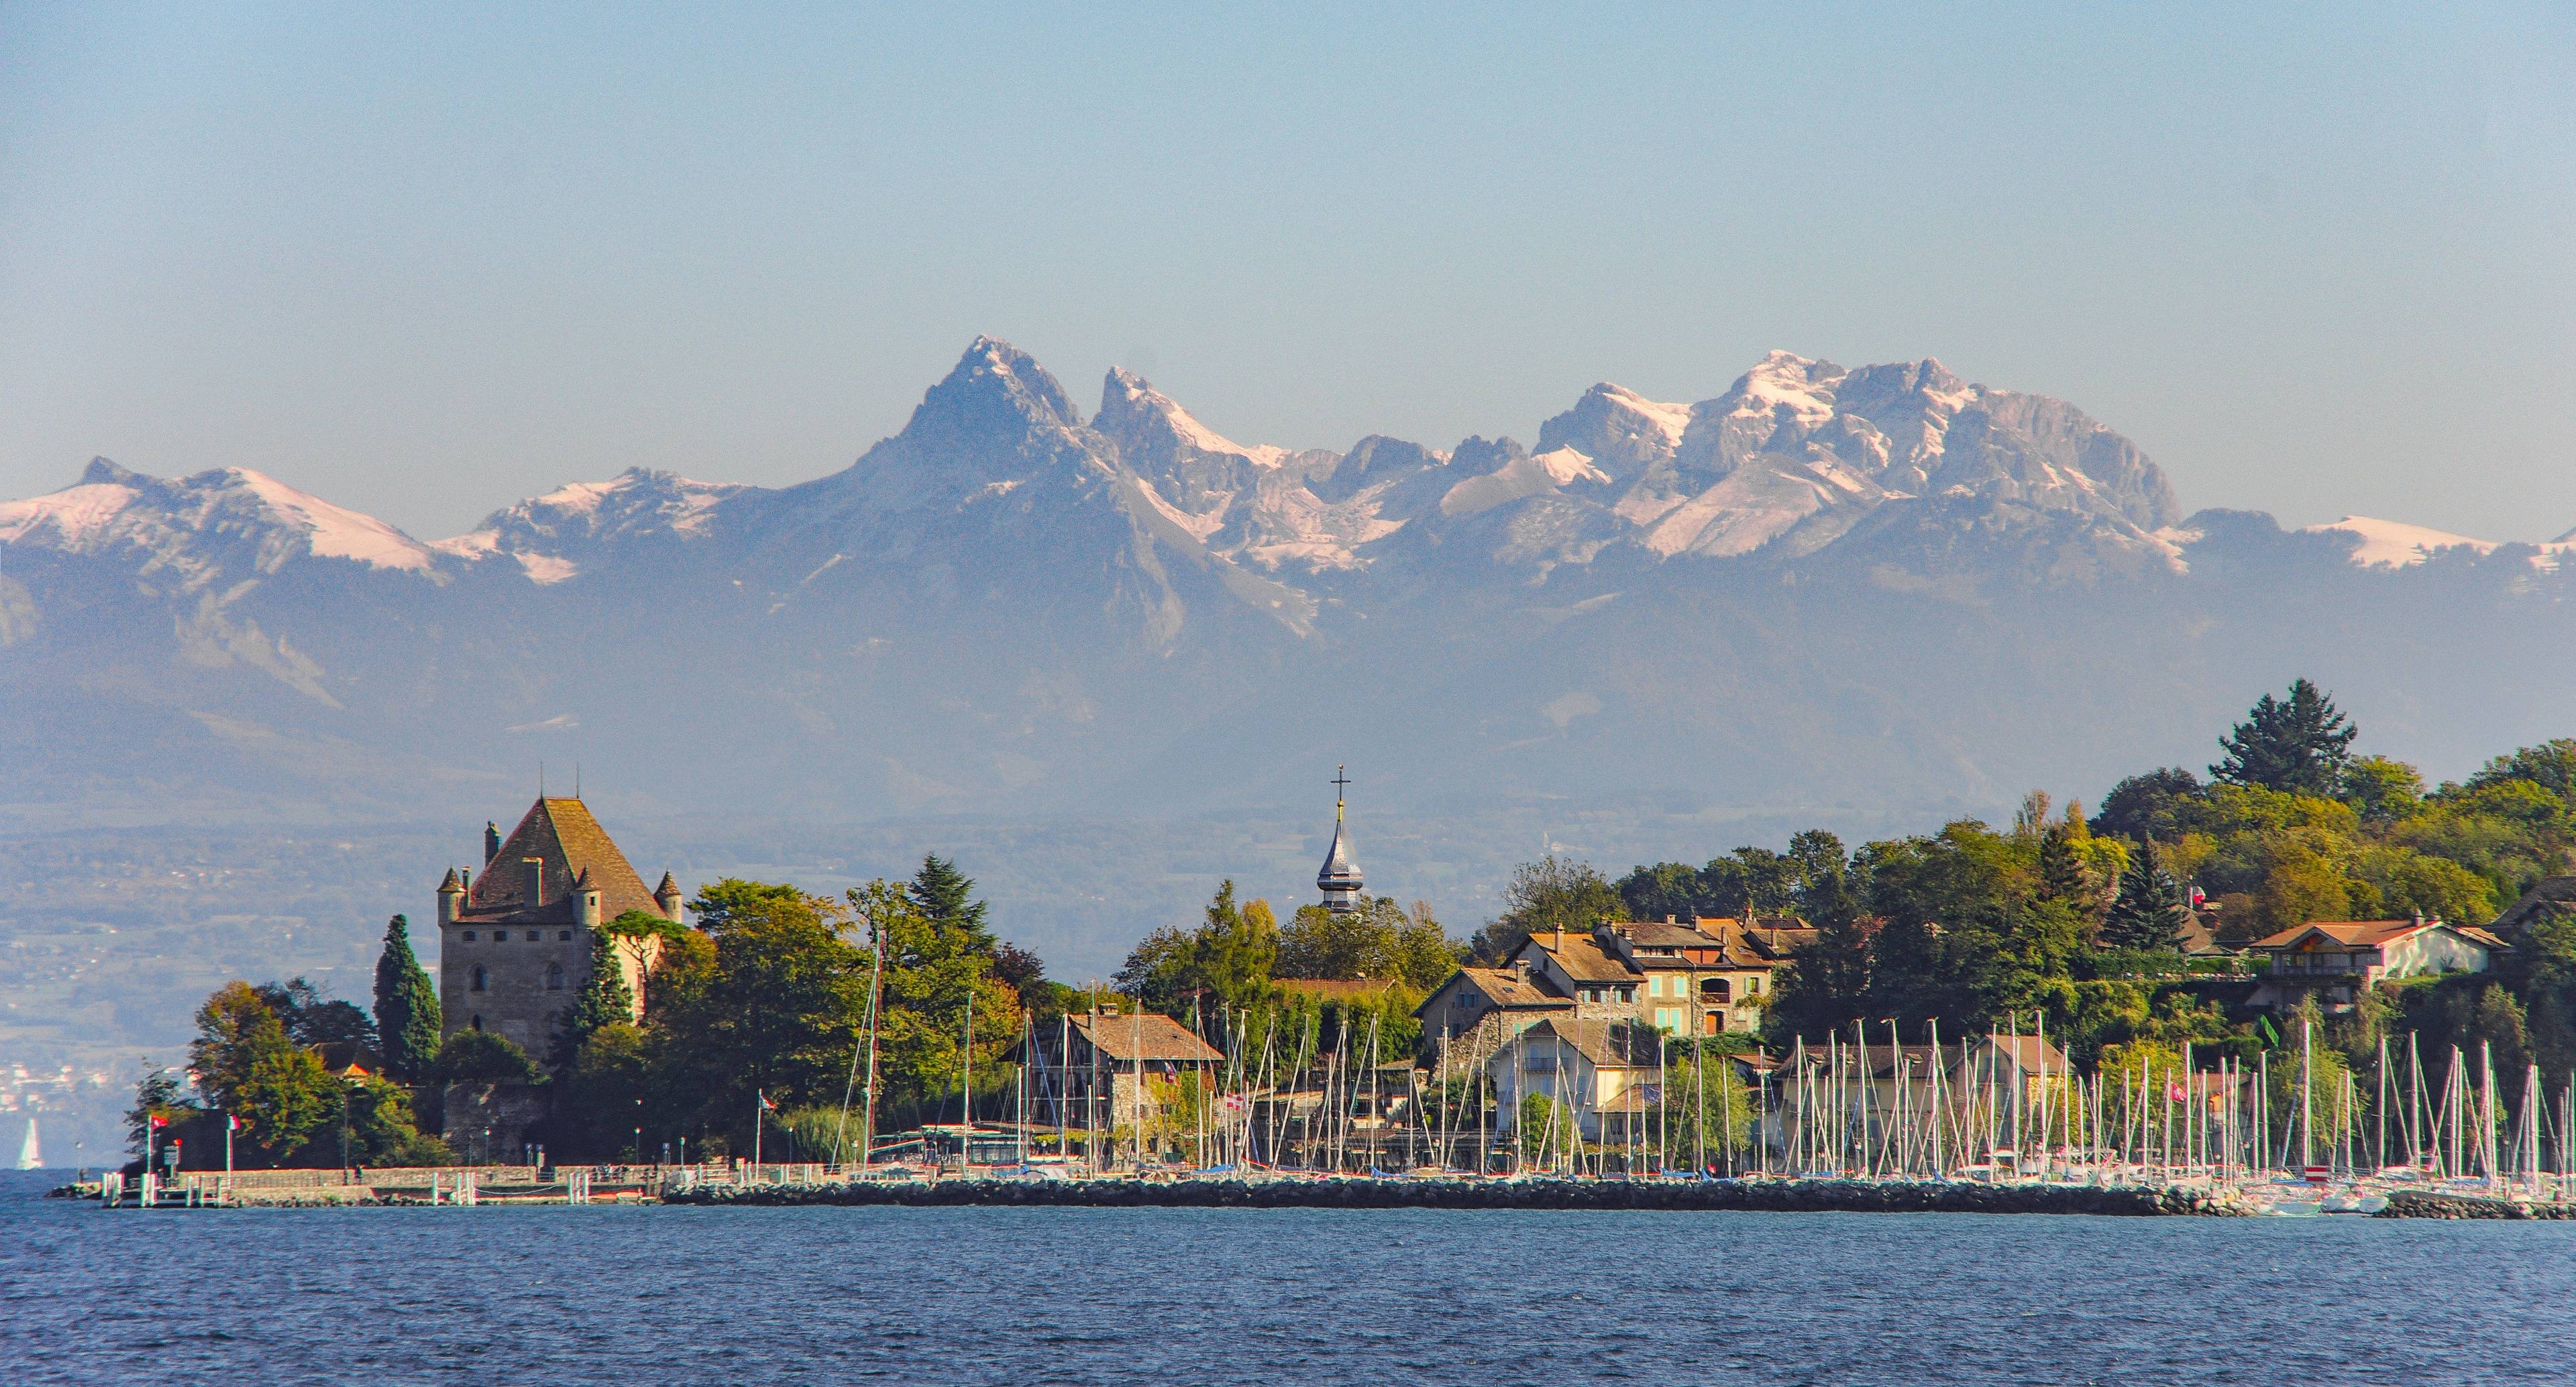 From the Picturesque Leman Lake to the Magical Burgundy